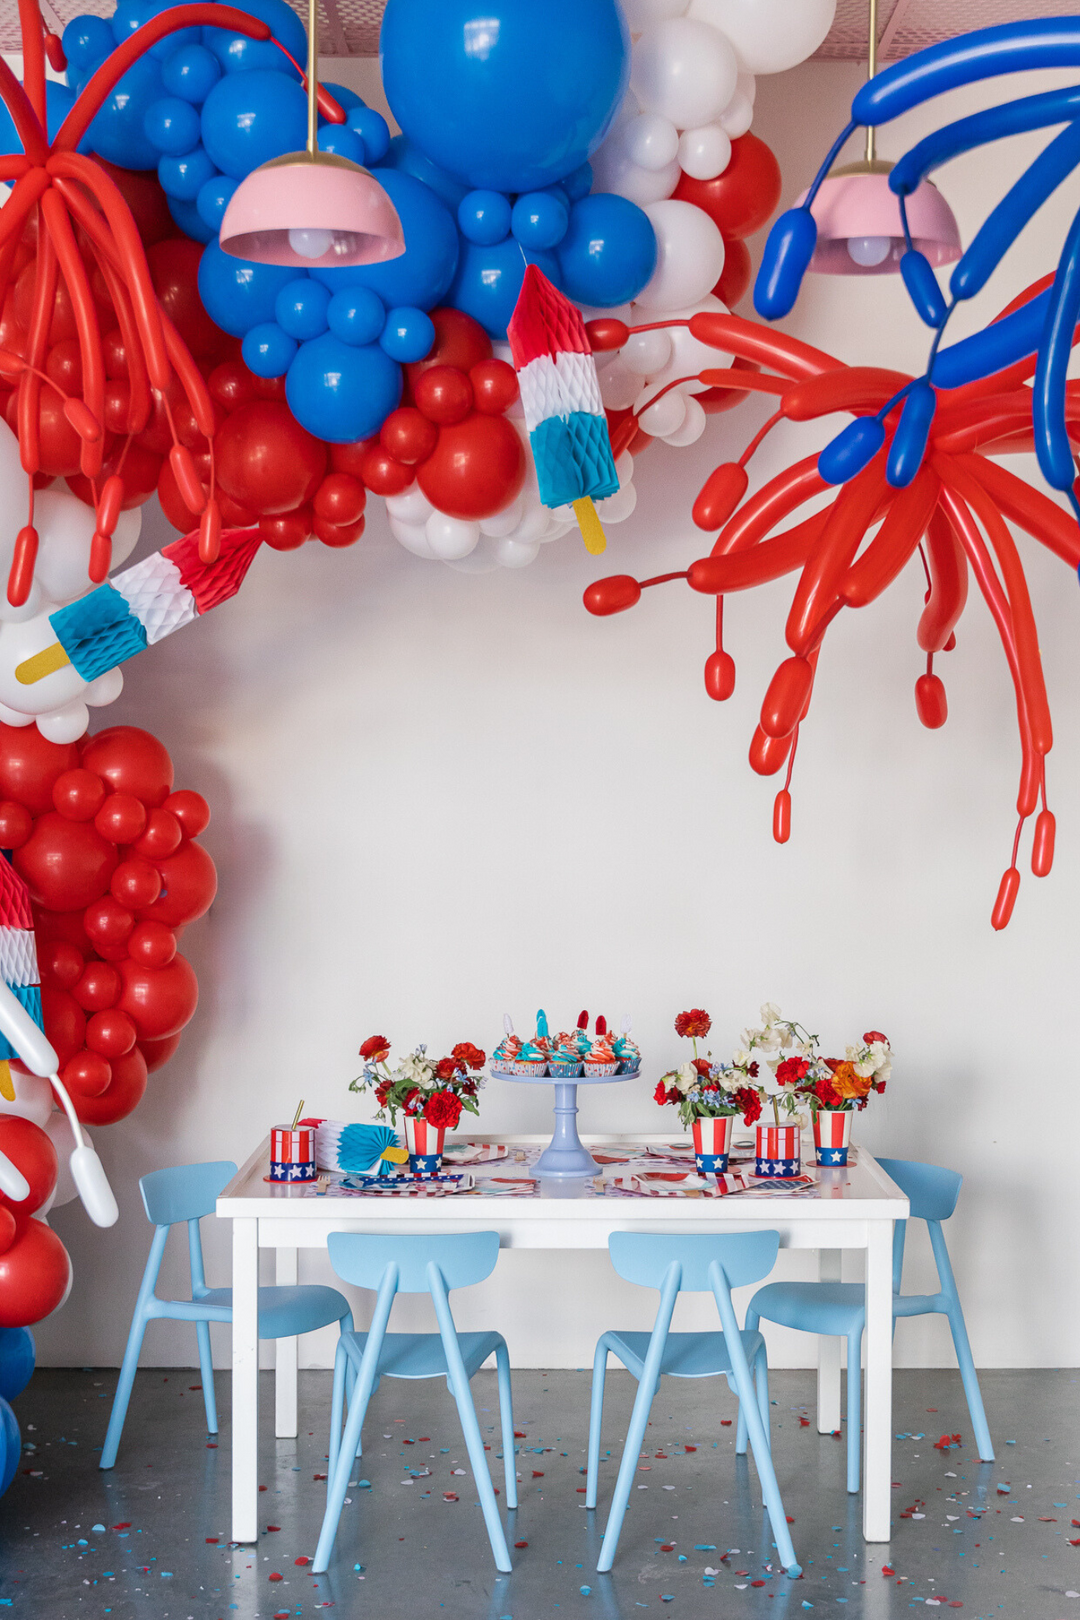 4th of July party red white blue balloons USA party supplies decorations 